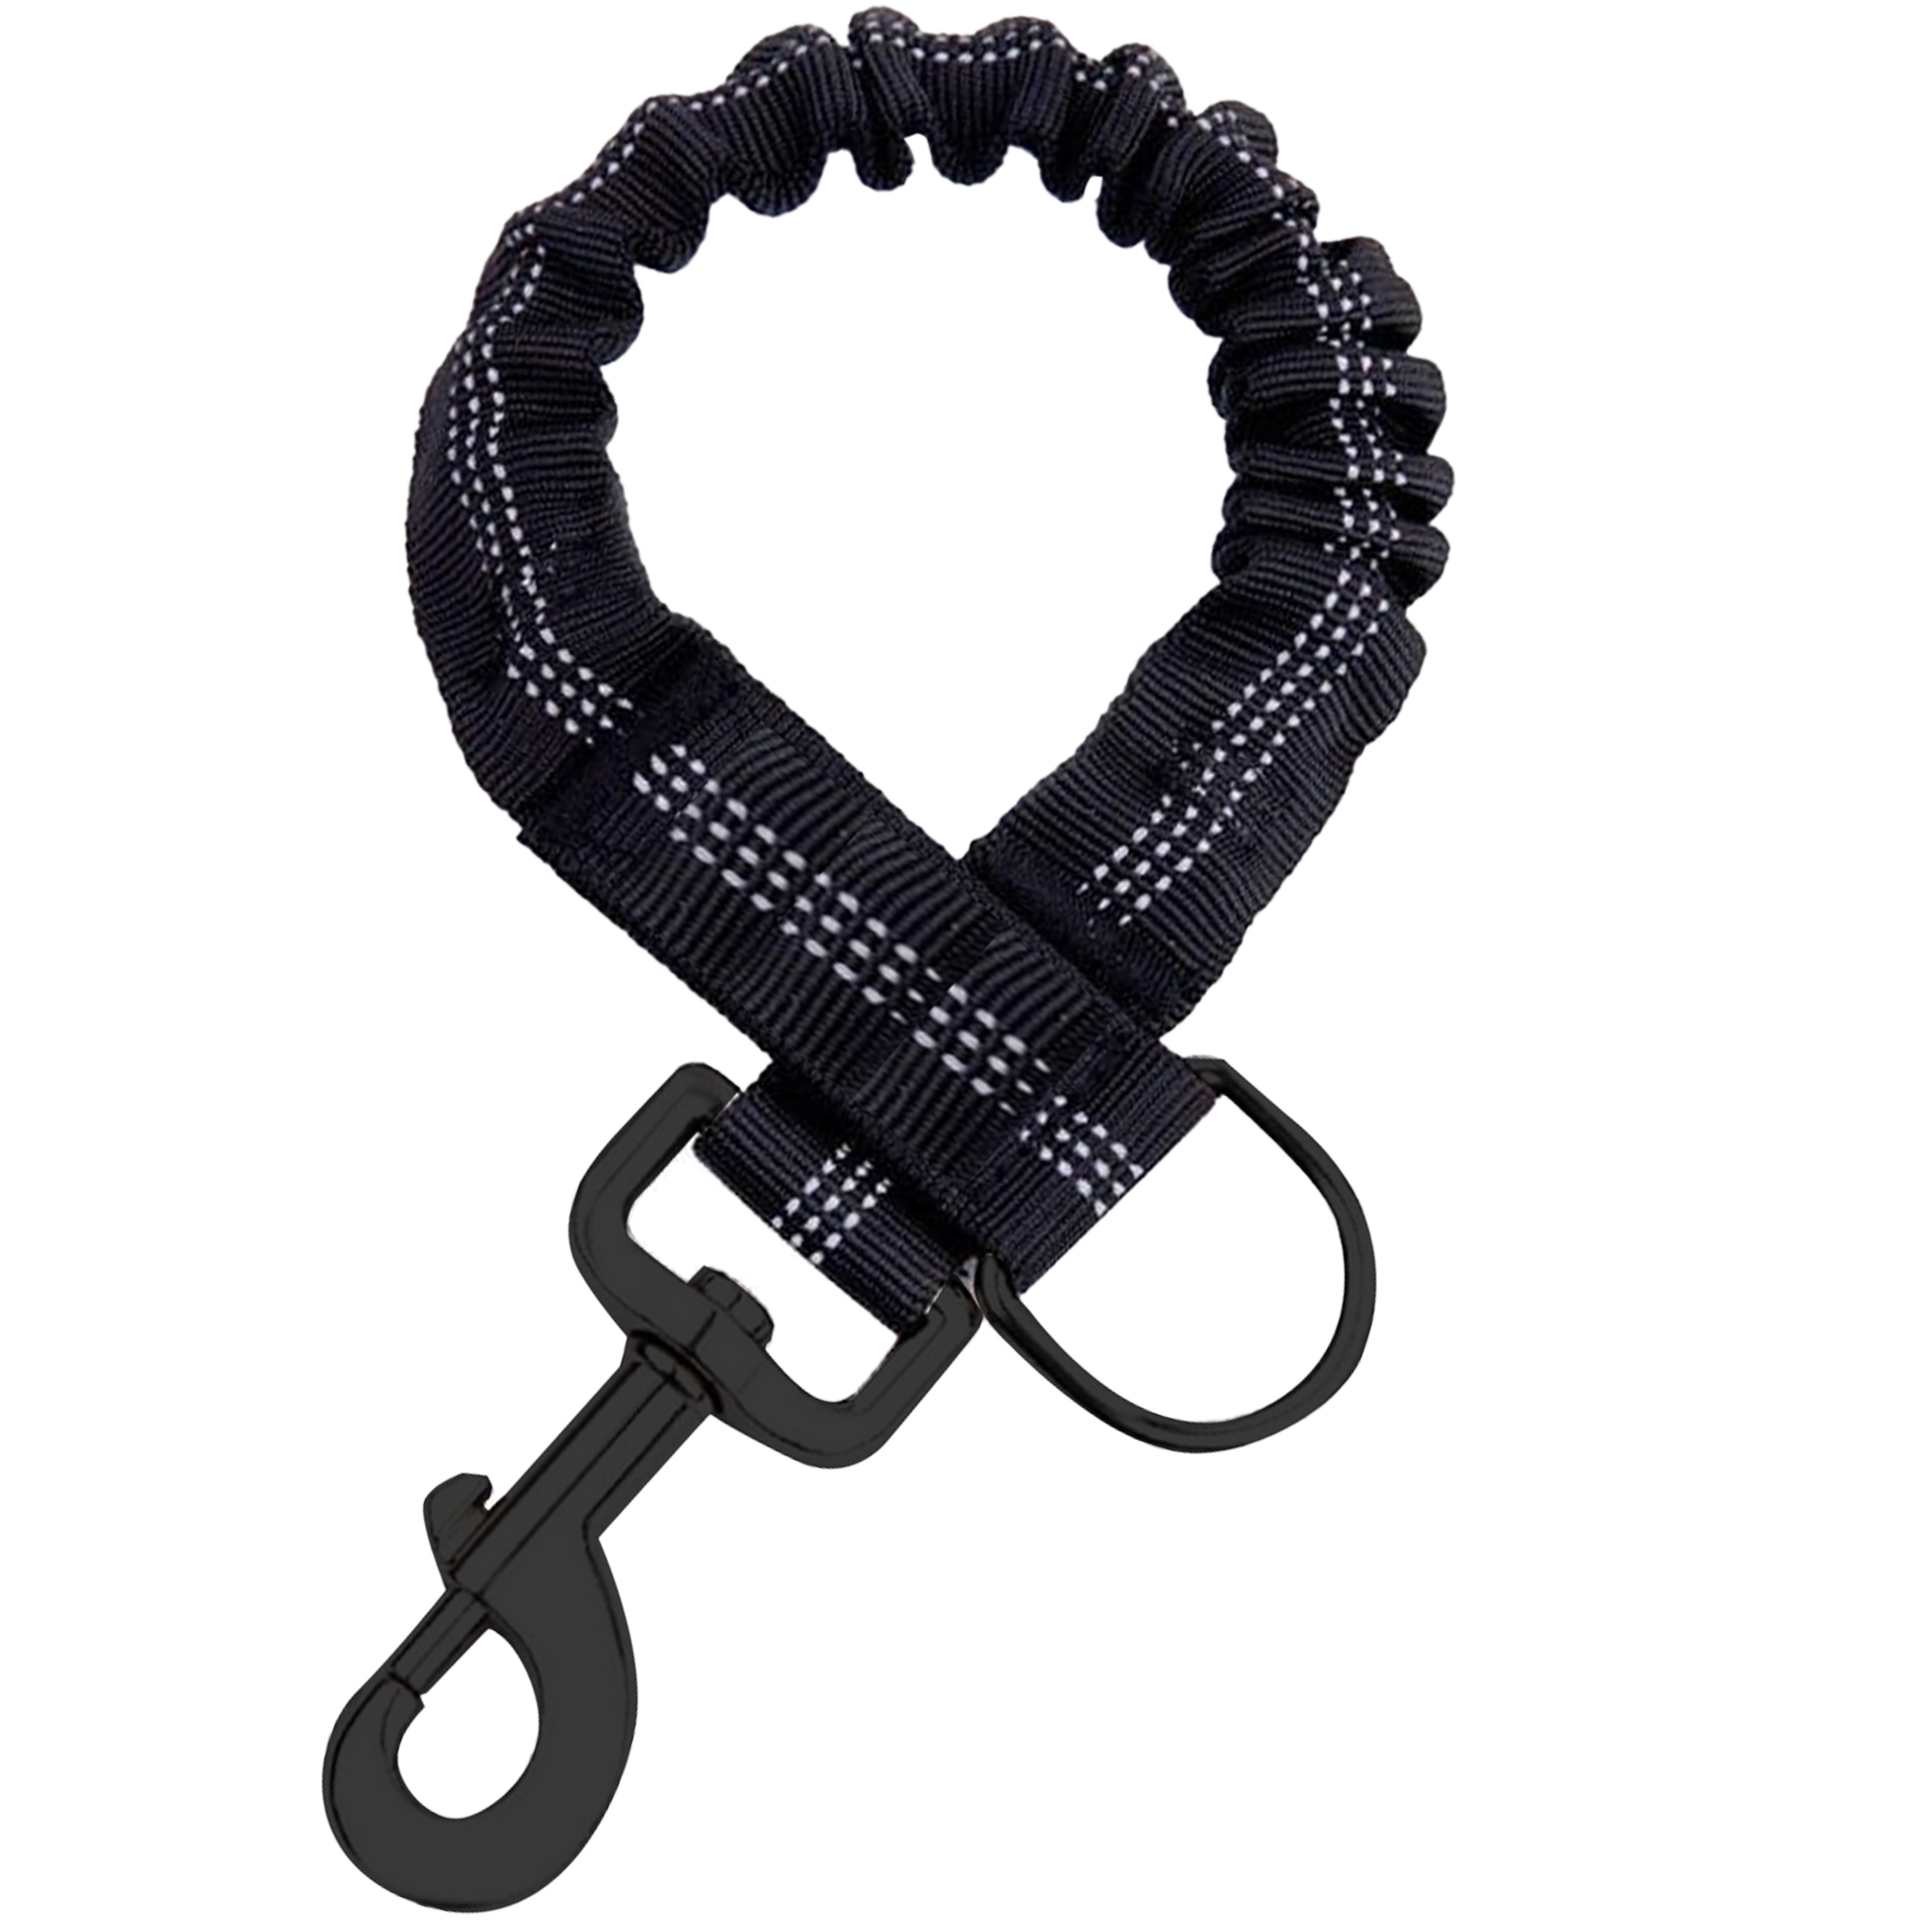 Coiled Fishing Lanyard Retractable Rod Convenient Extender Leash